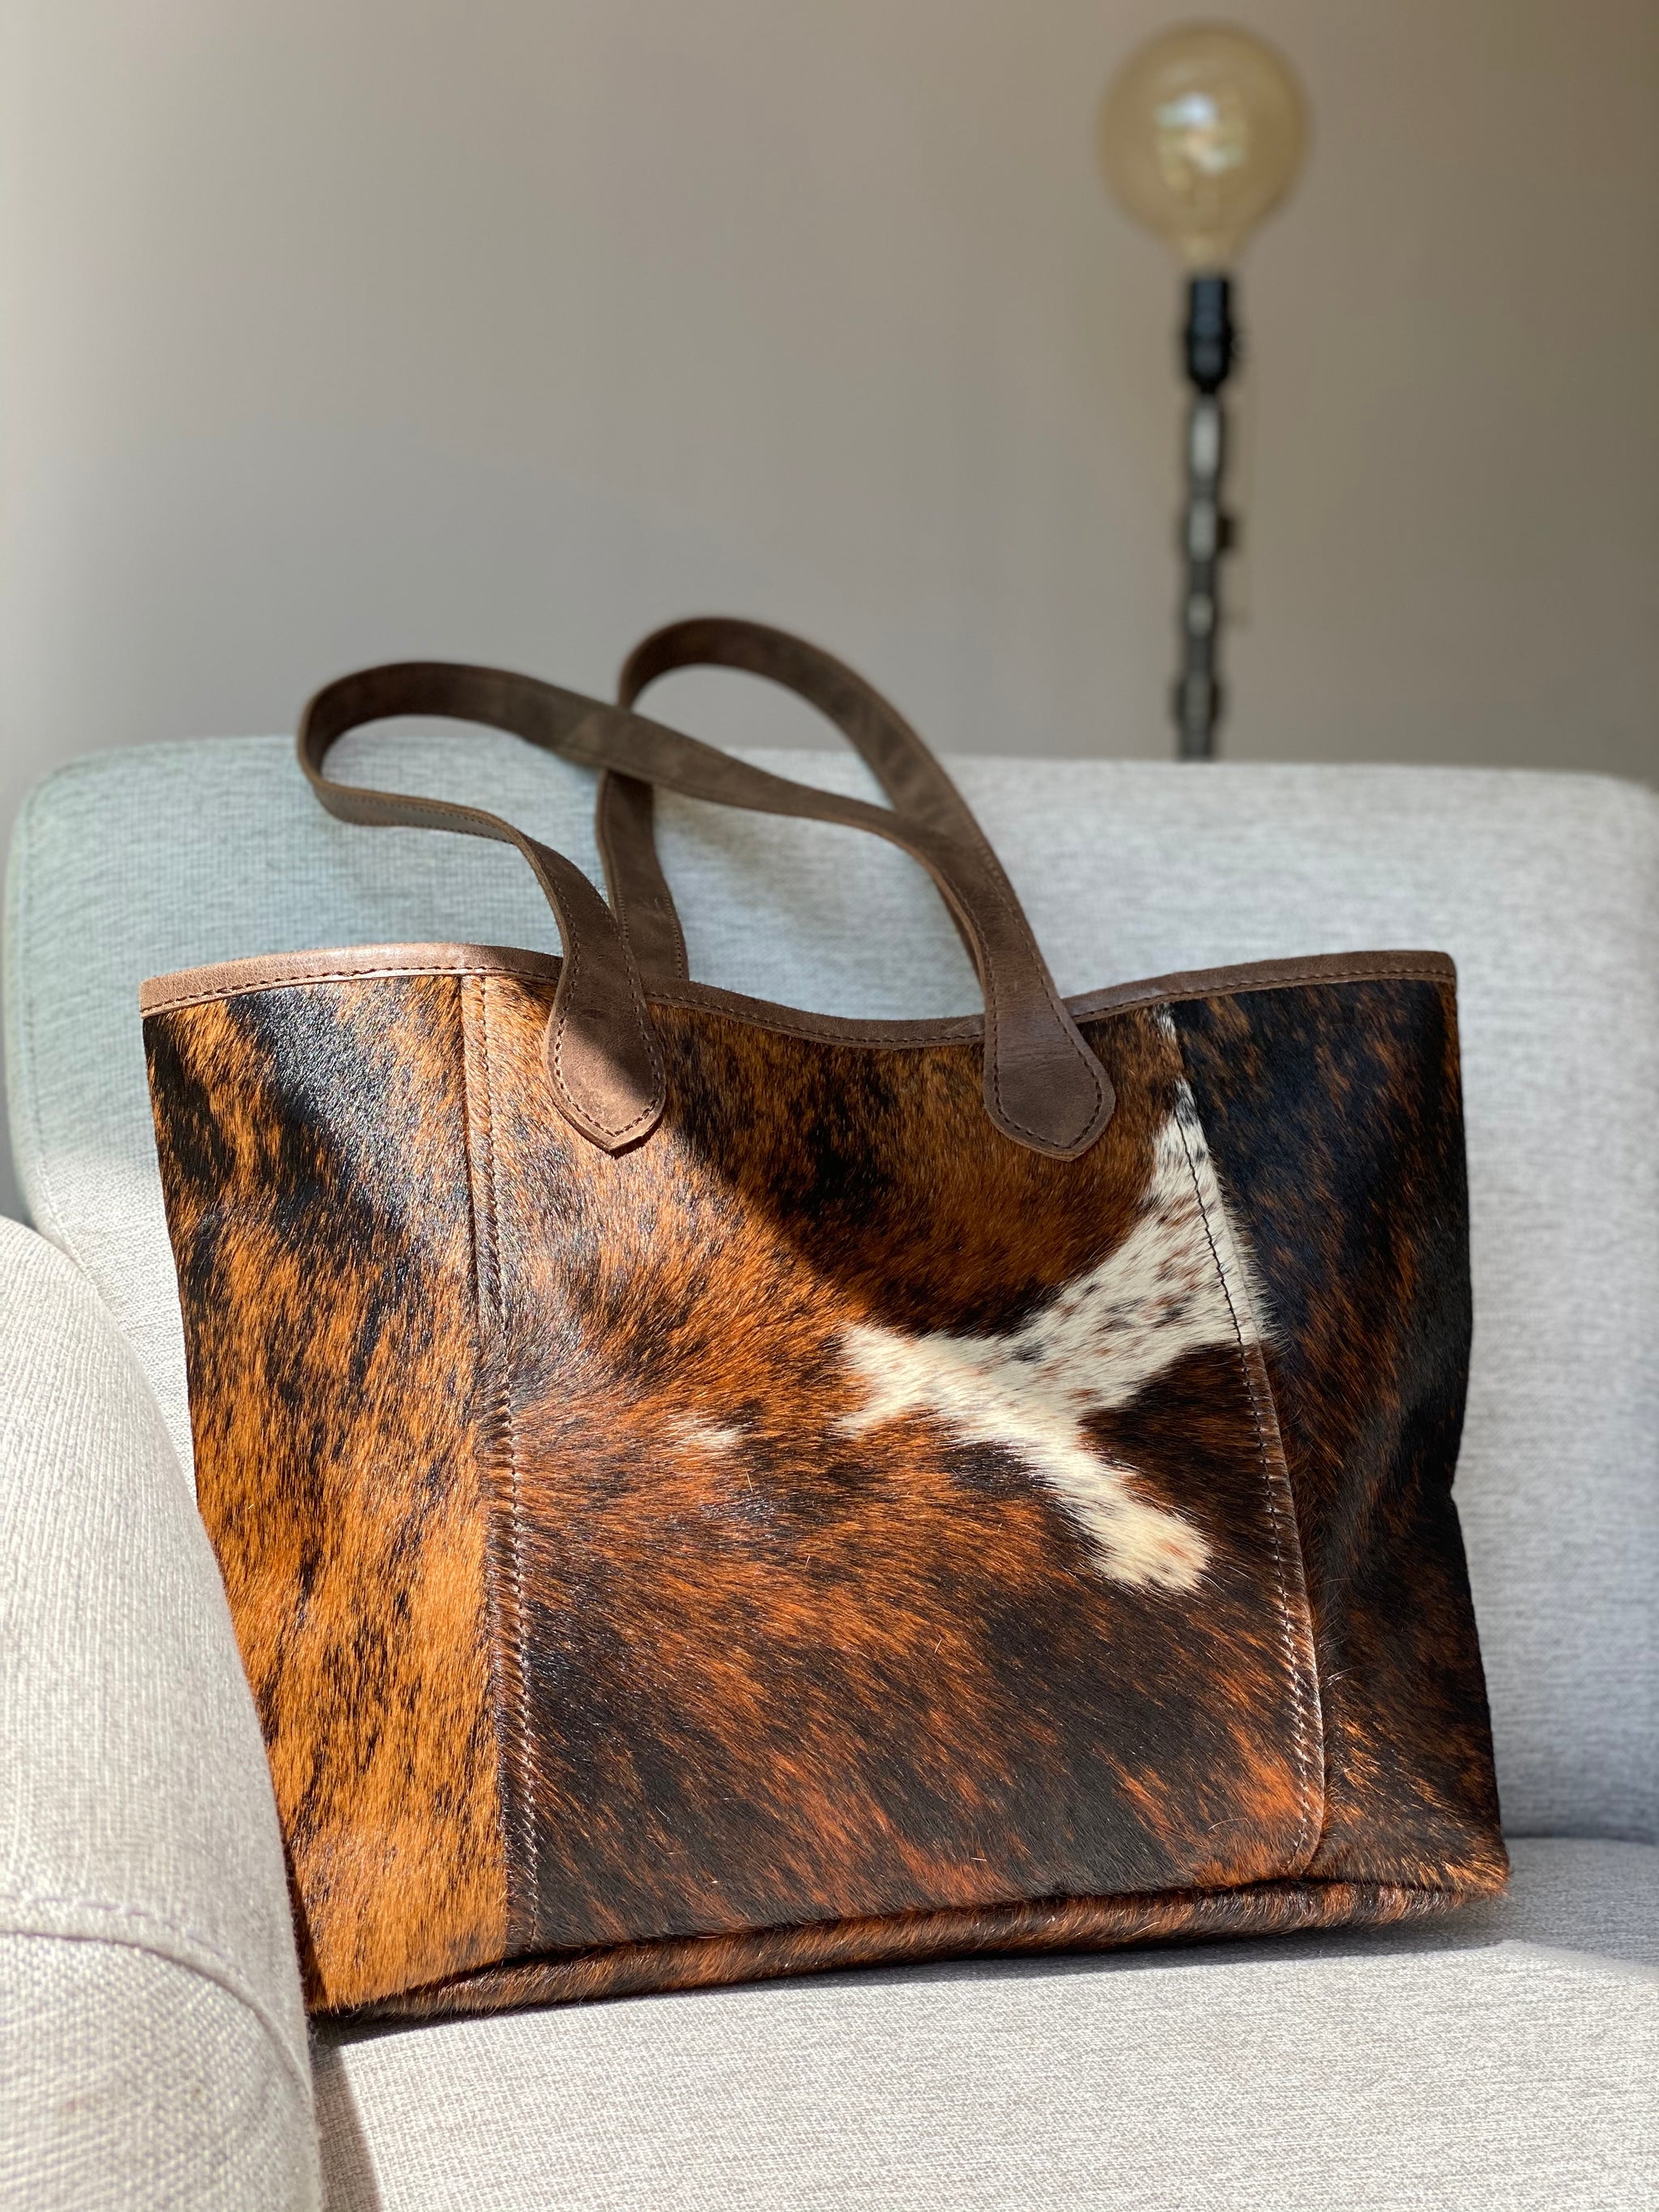 The Grocery Getter Tote - Cowhide or Leather